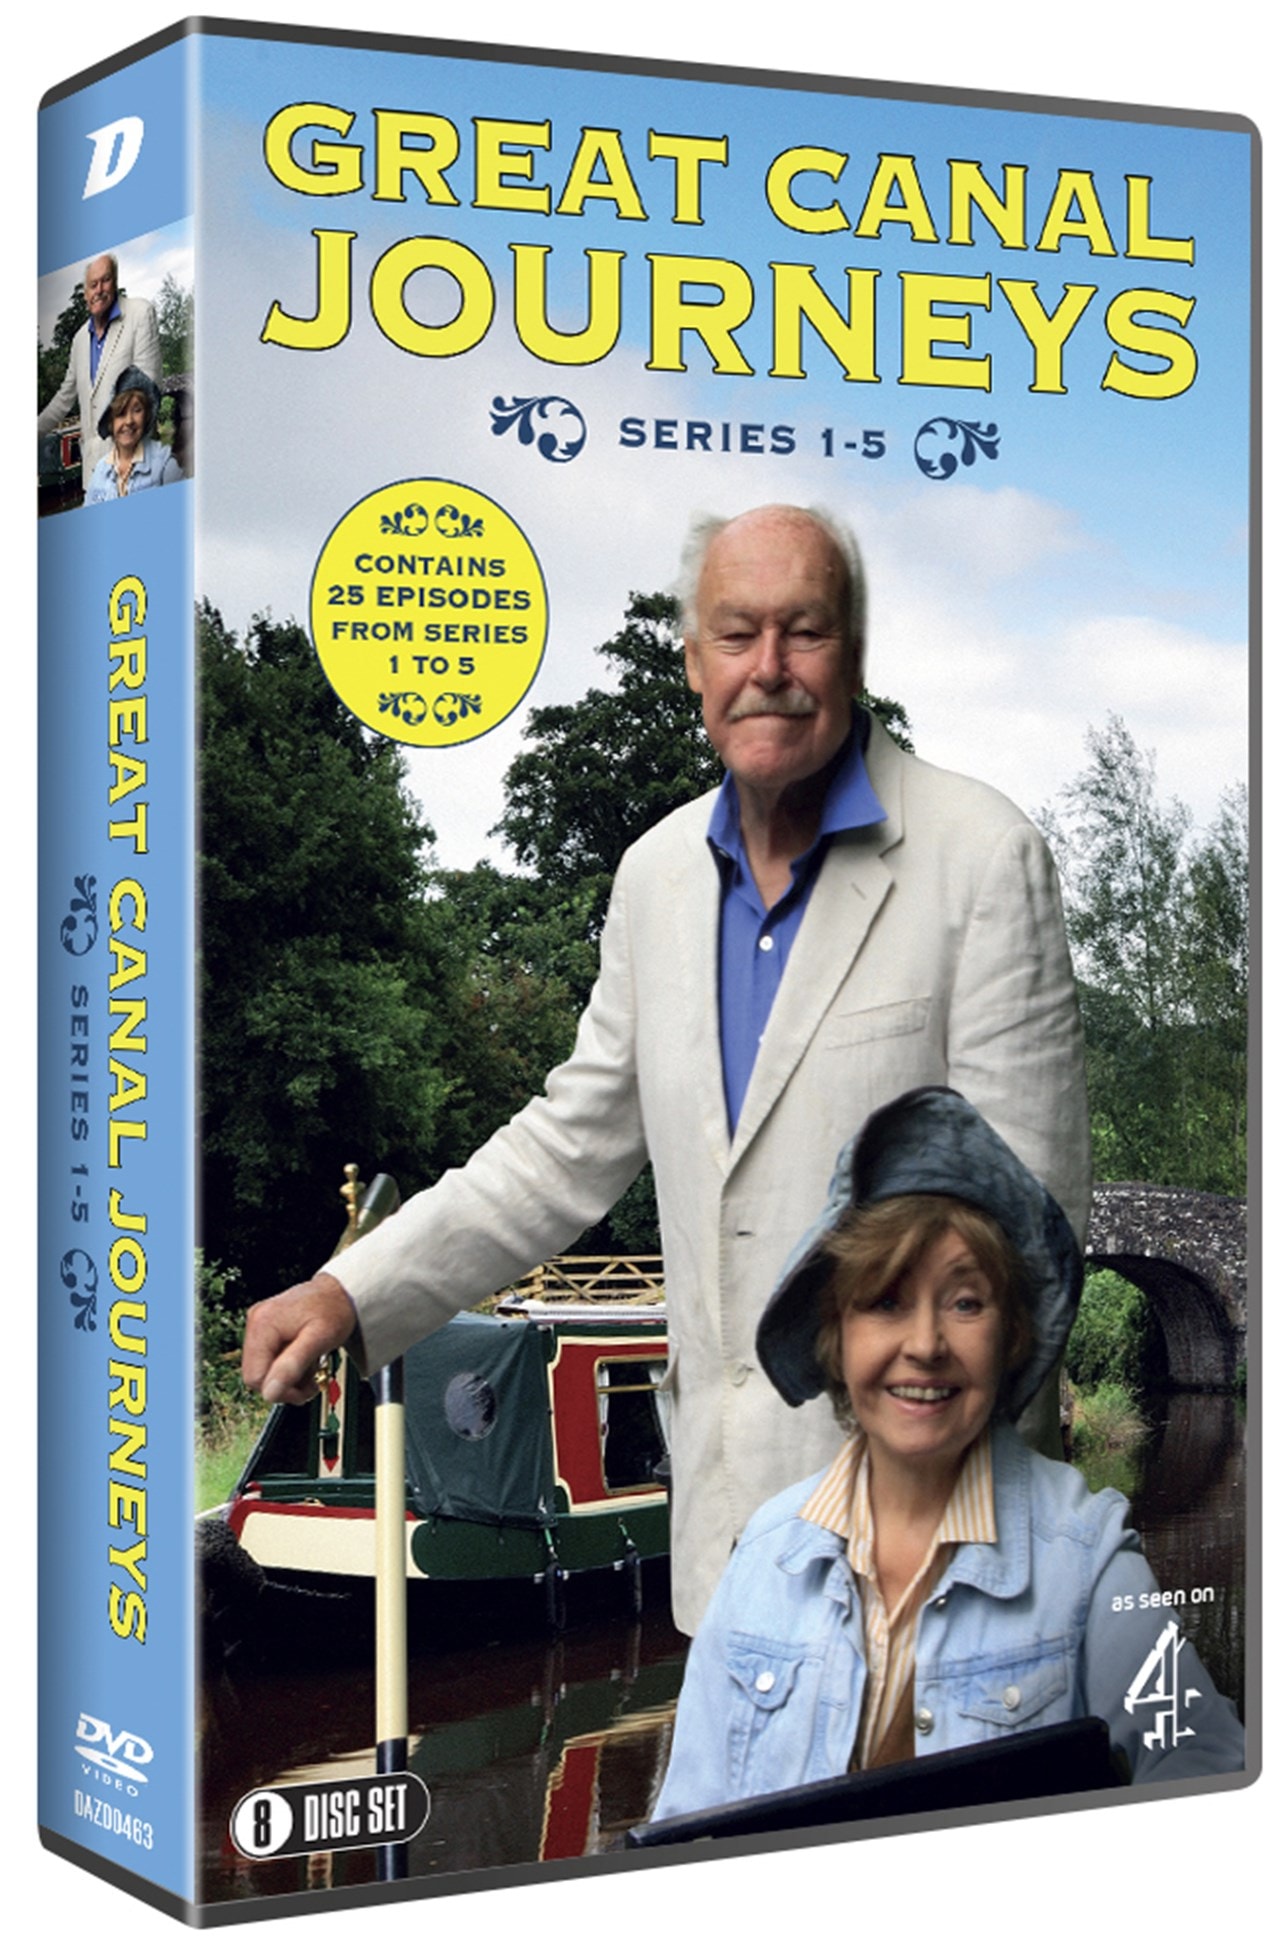 our great canal journeys dvd